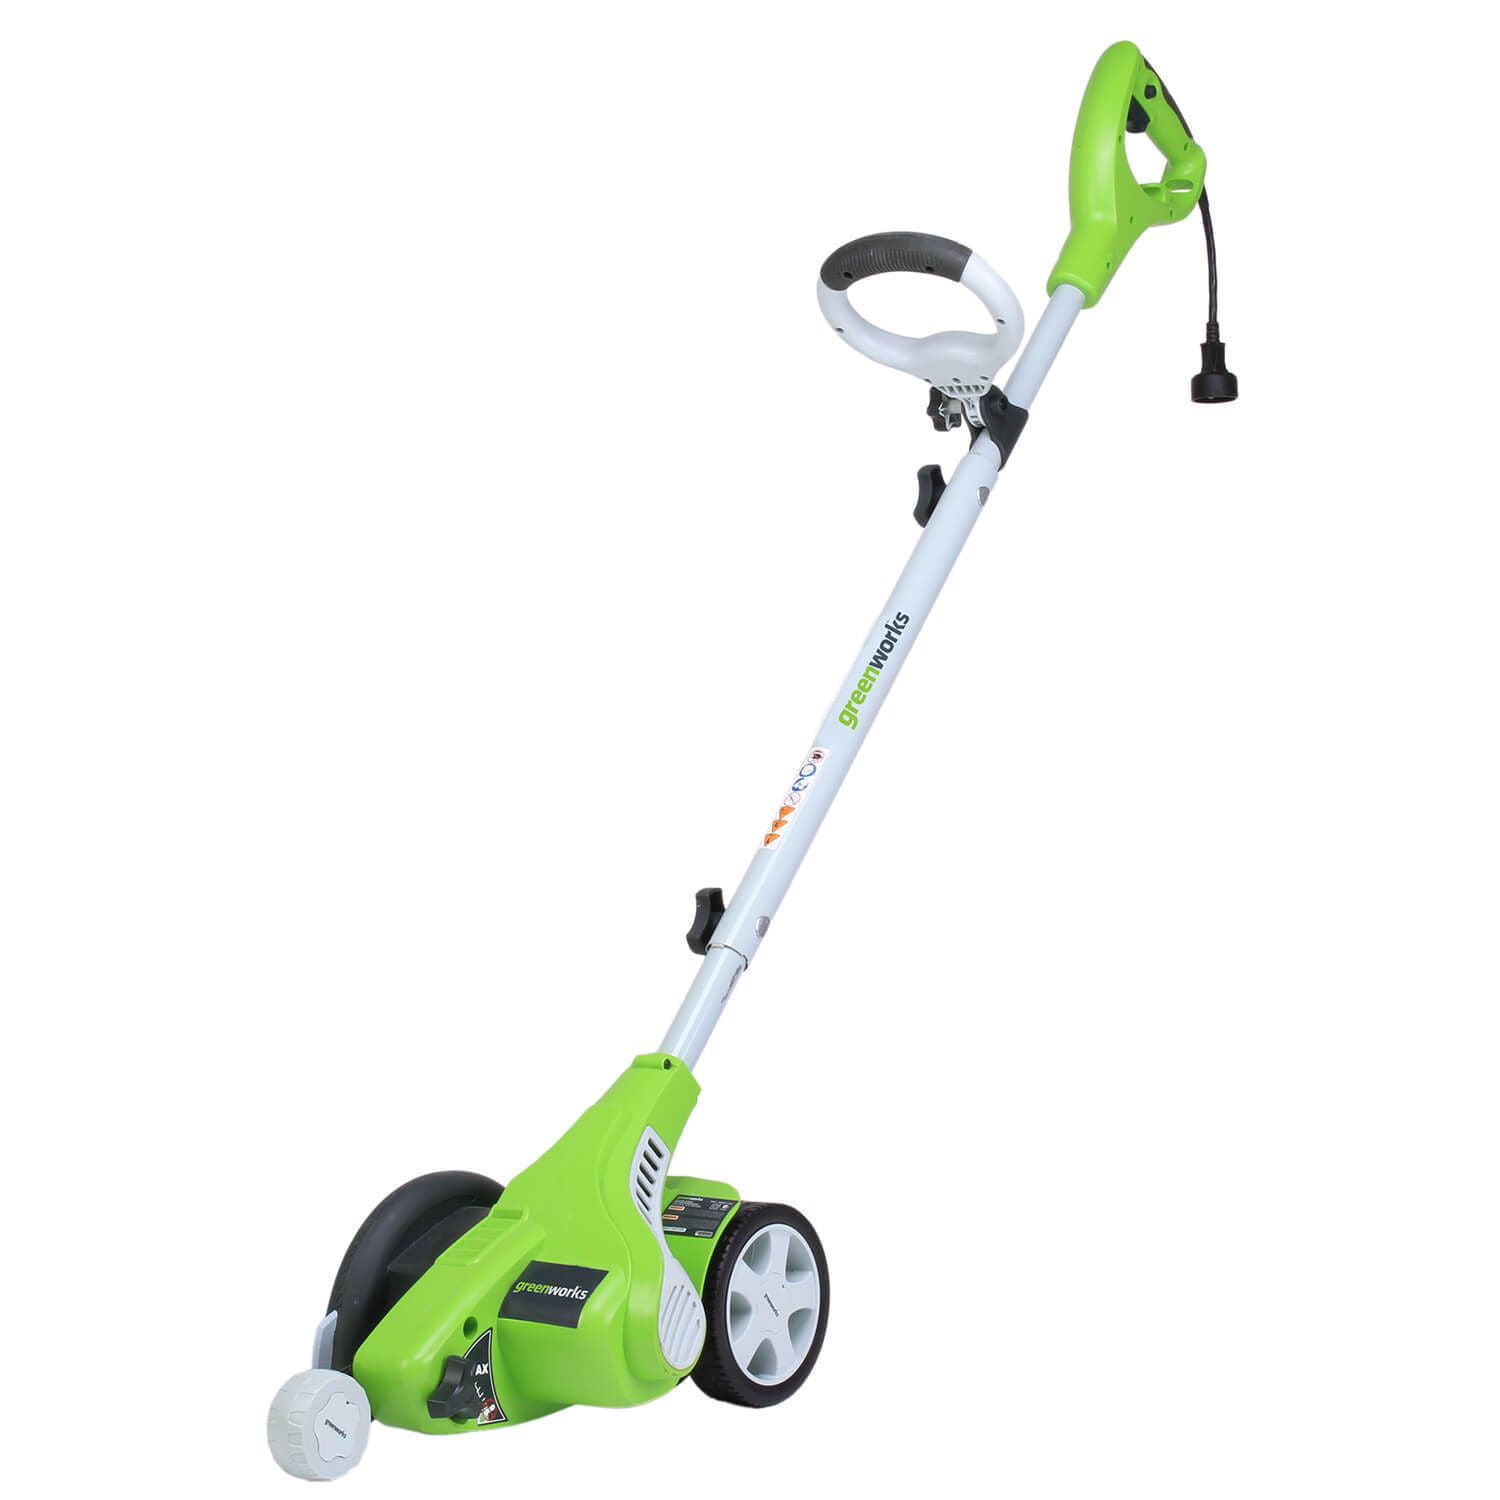 Greenworks 12 Amp 7.5-inch Corded Electric Edger， 27032